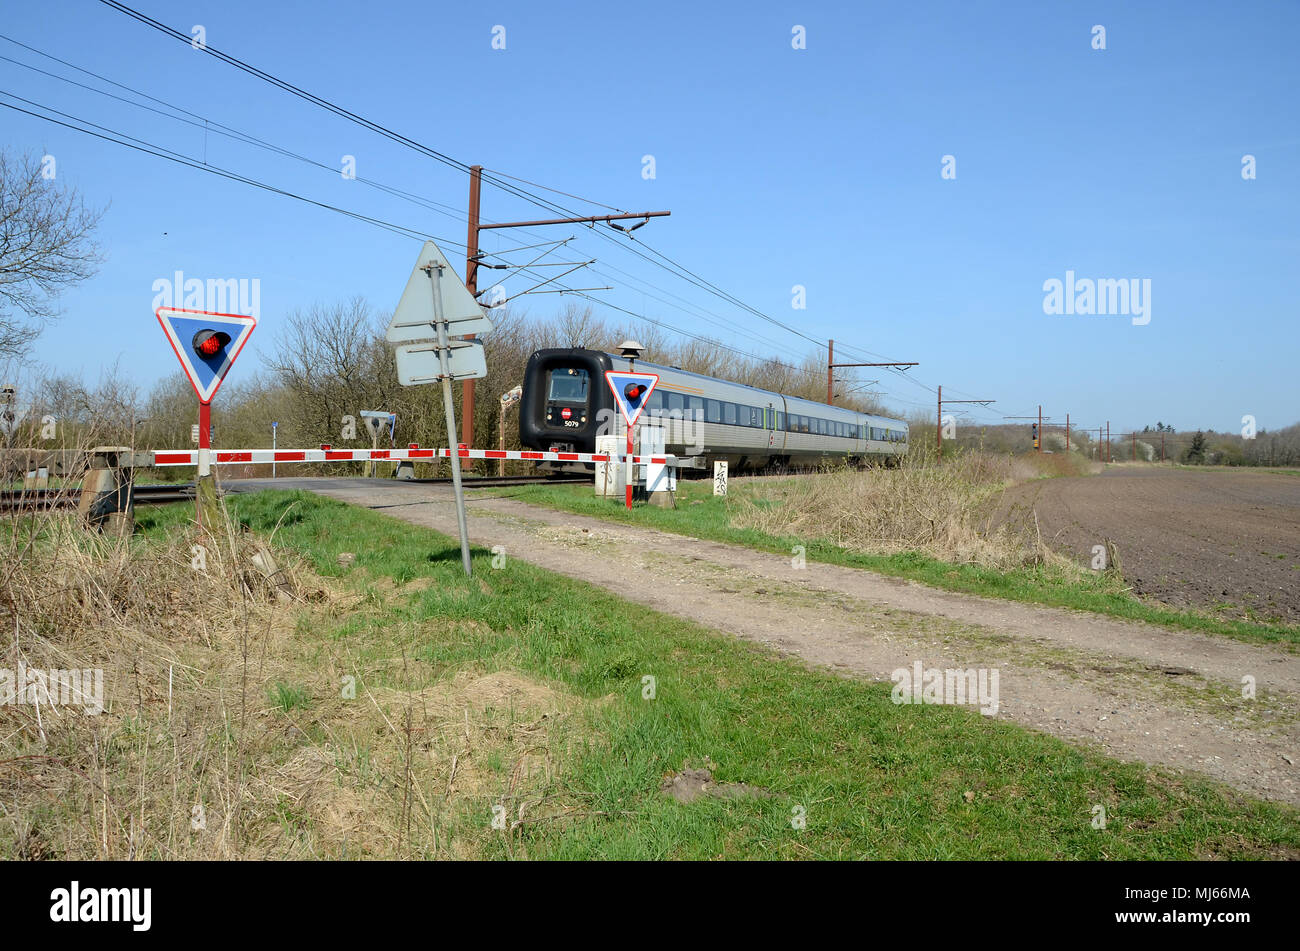 Tinglev, Denmark - April 19, 2018: A Flexliner 'rubbernose' train of the DSB passes a level crossing south of town. Stock Photo